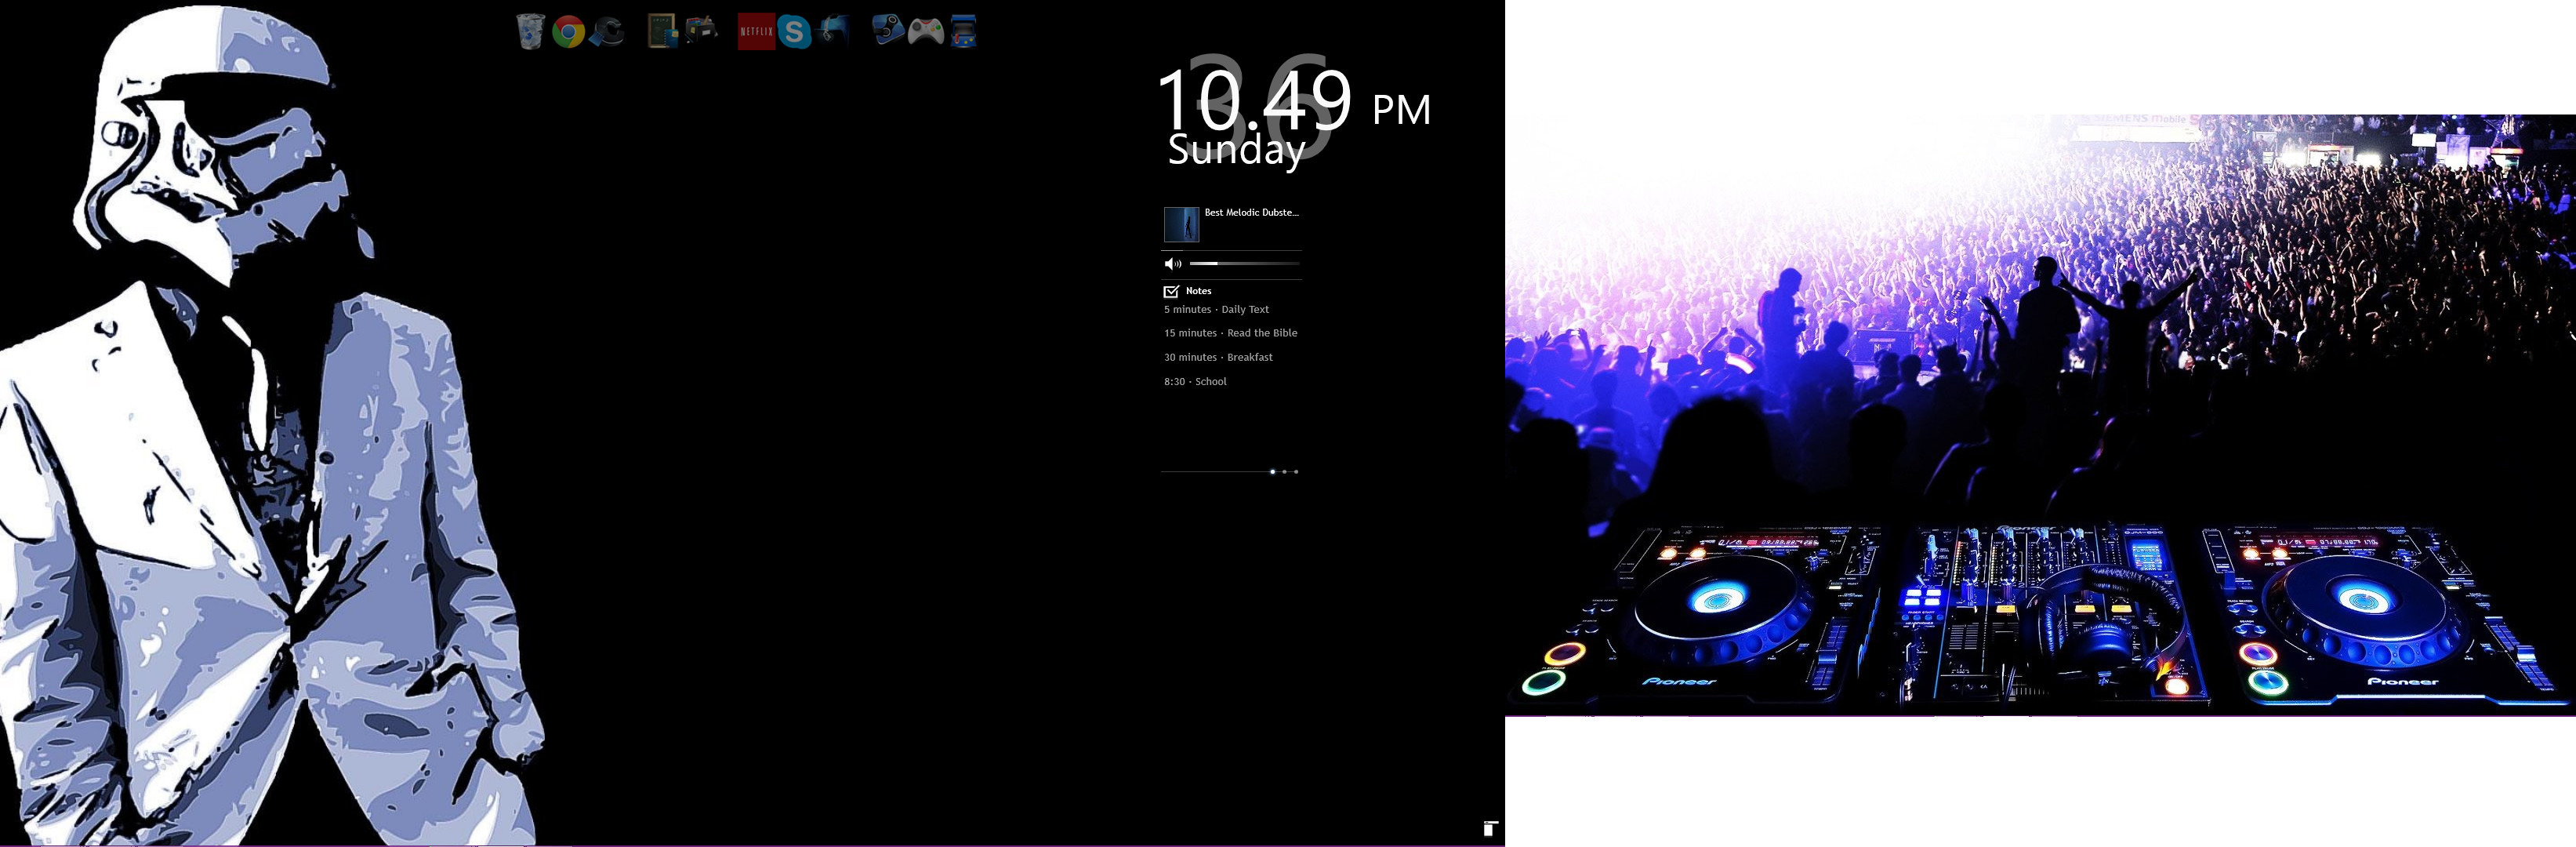 3286x1080 200 comments :D Updated: What's your backgrounds/wallpapers? (showing off my  Star Wars wallpapers)